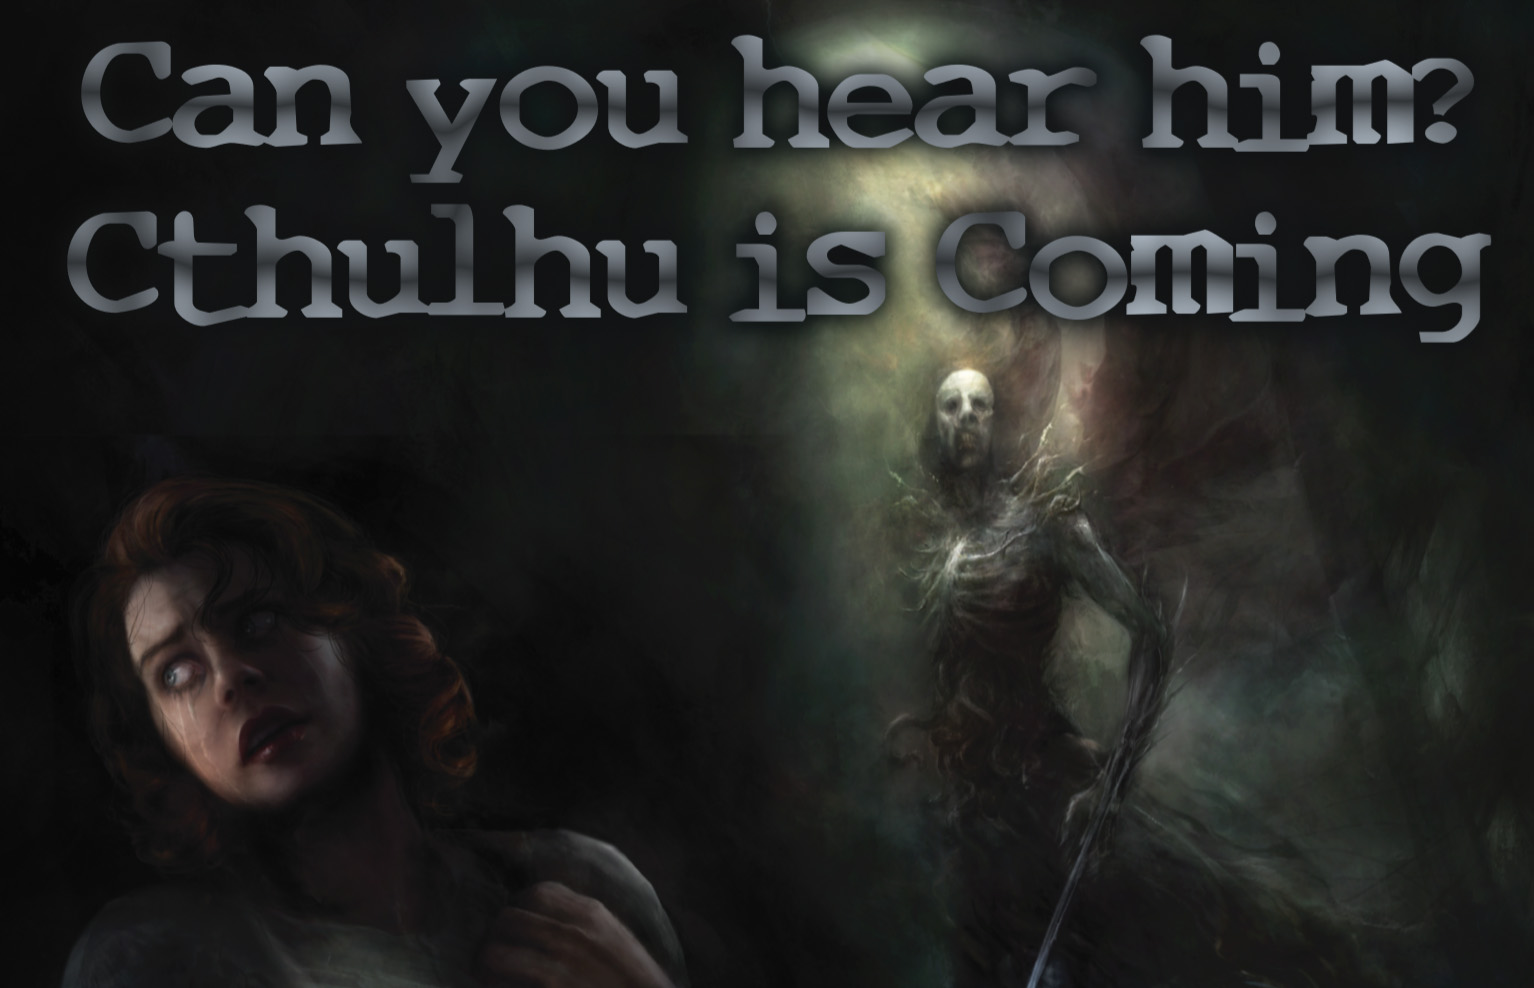 Cthulhu is coming